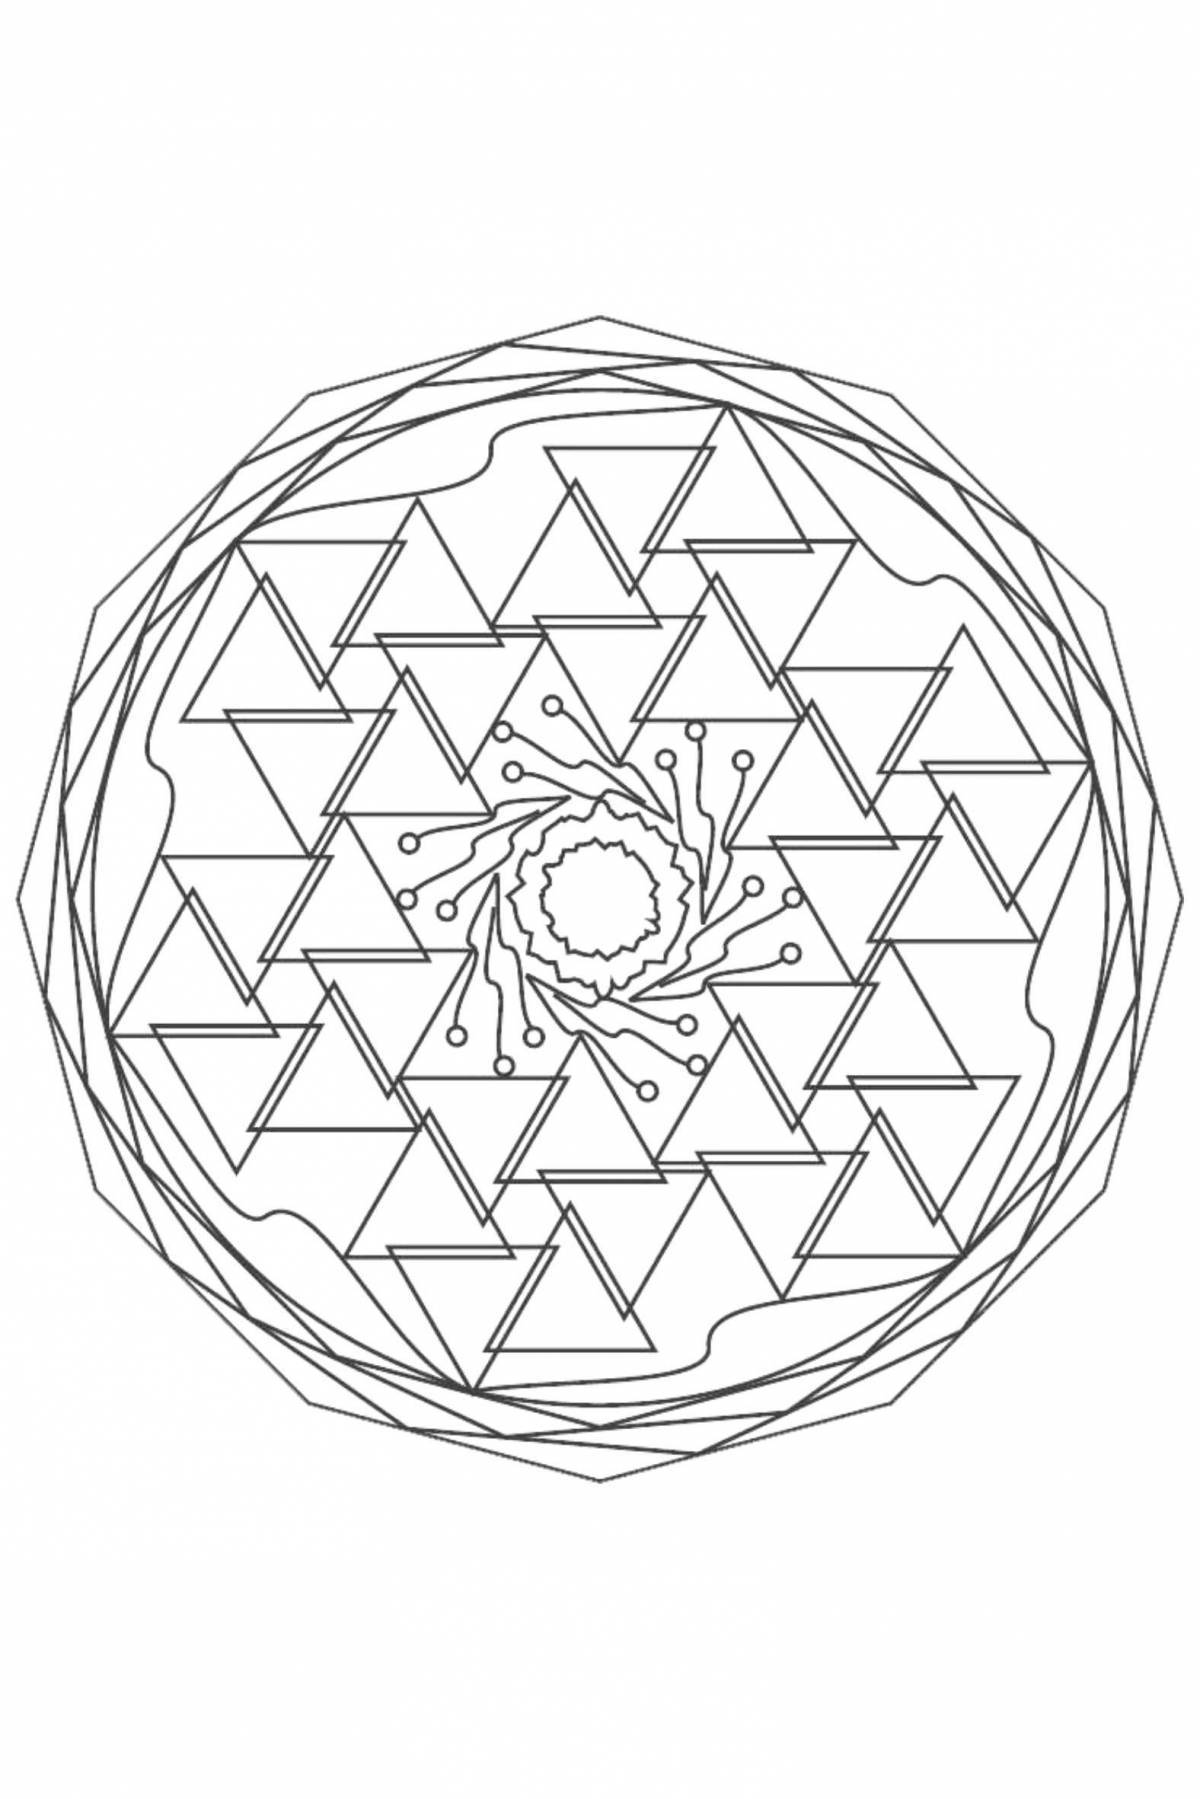 Exquisite mandala coloring pages with meaning